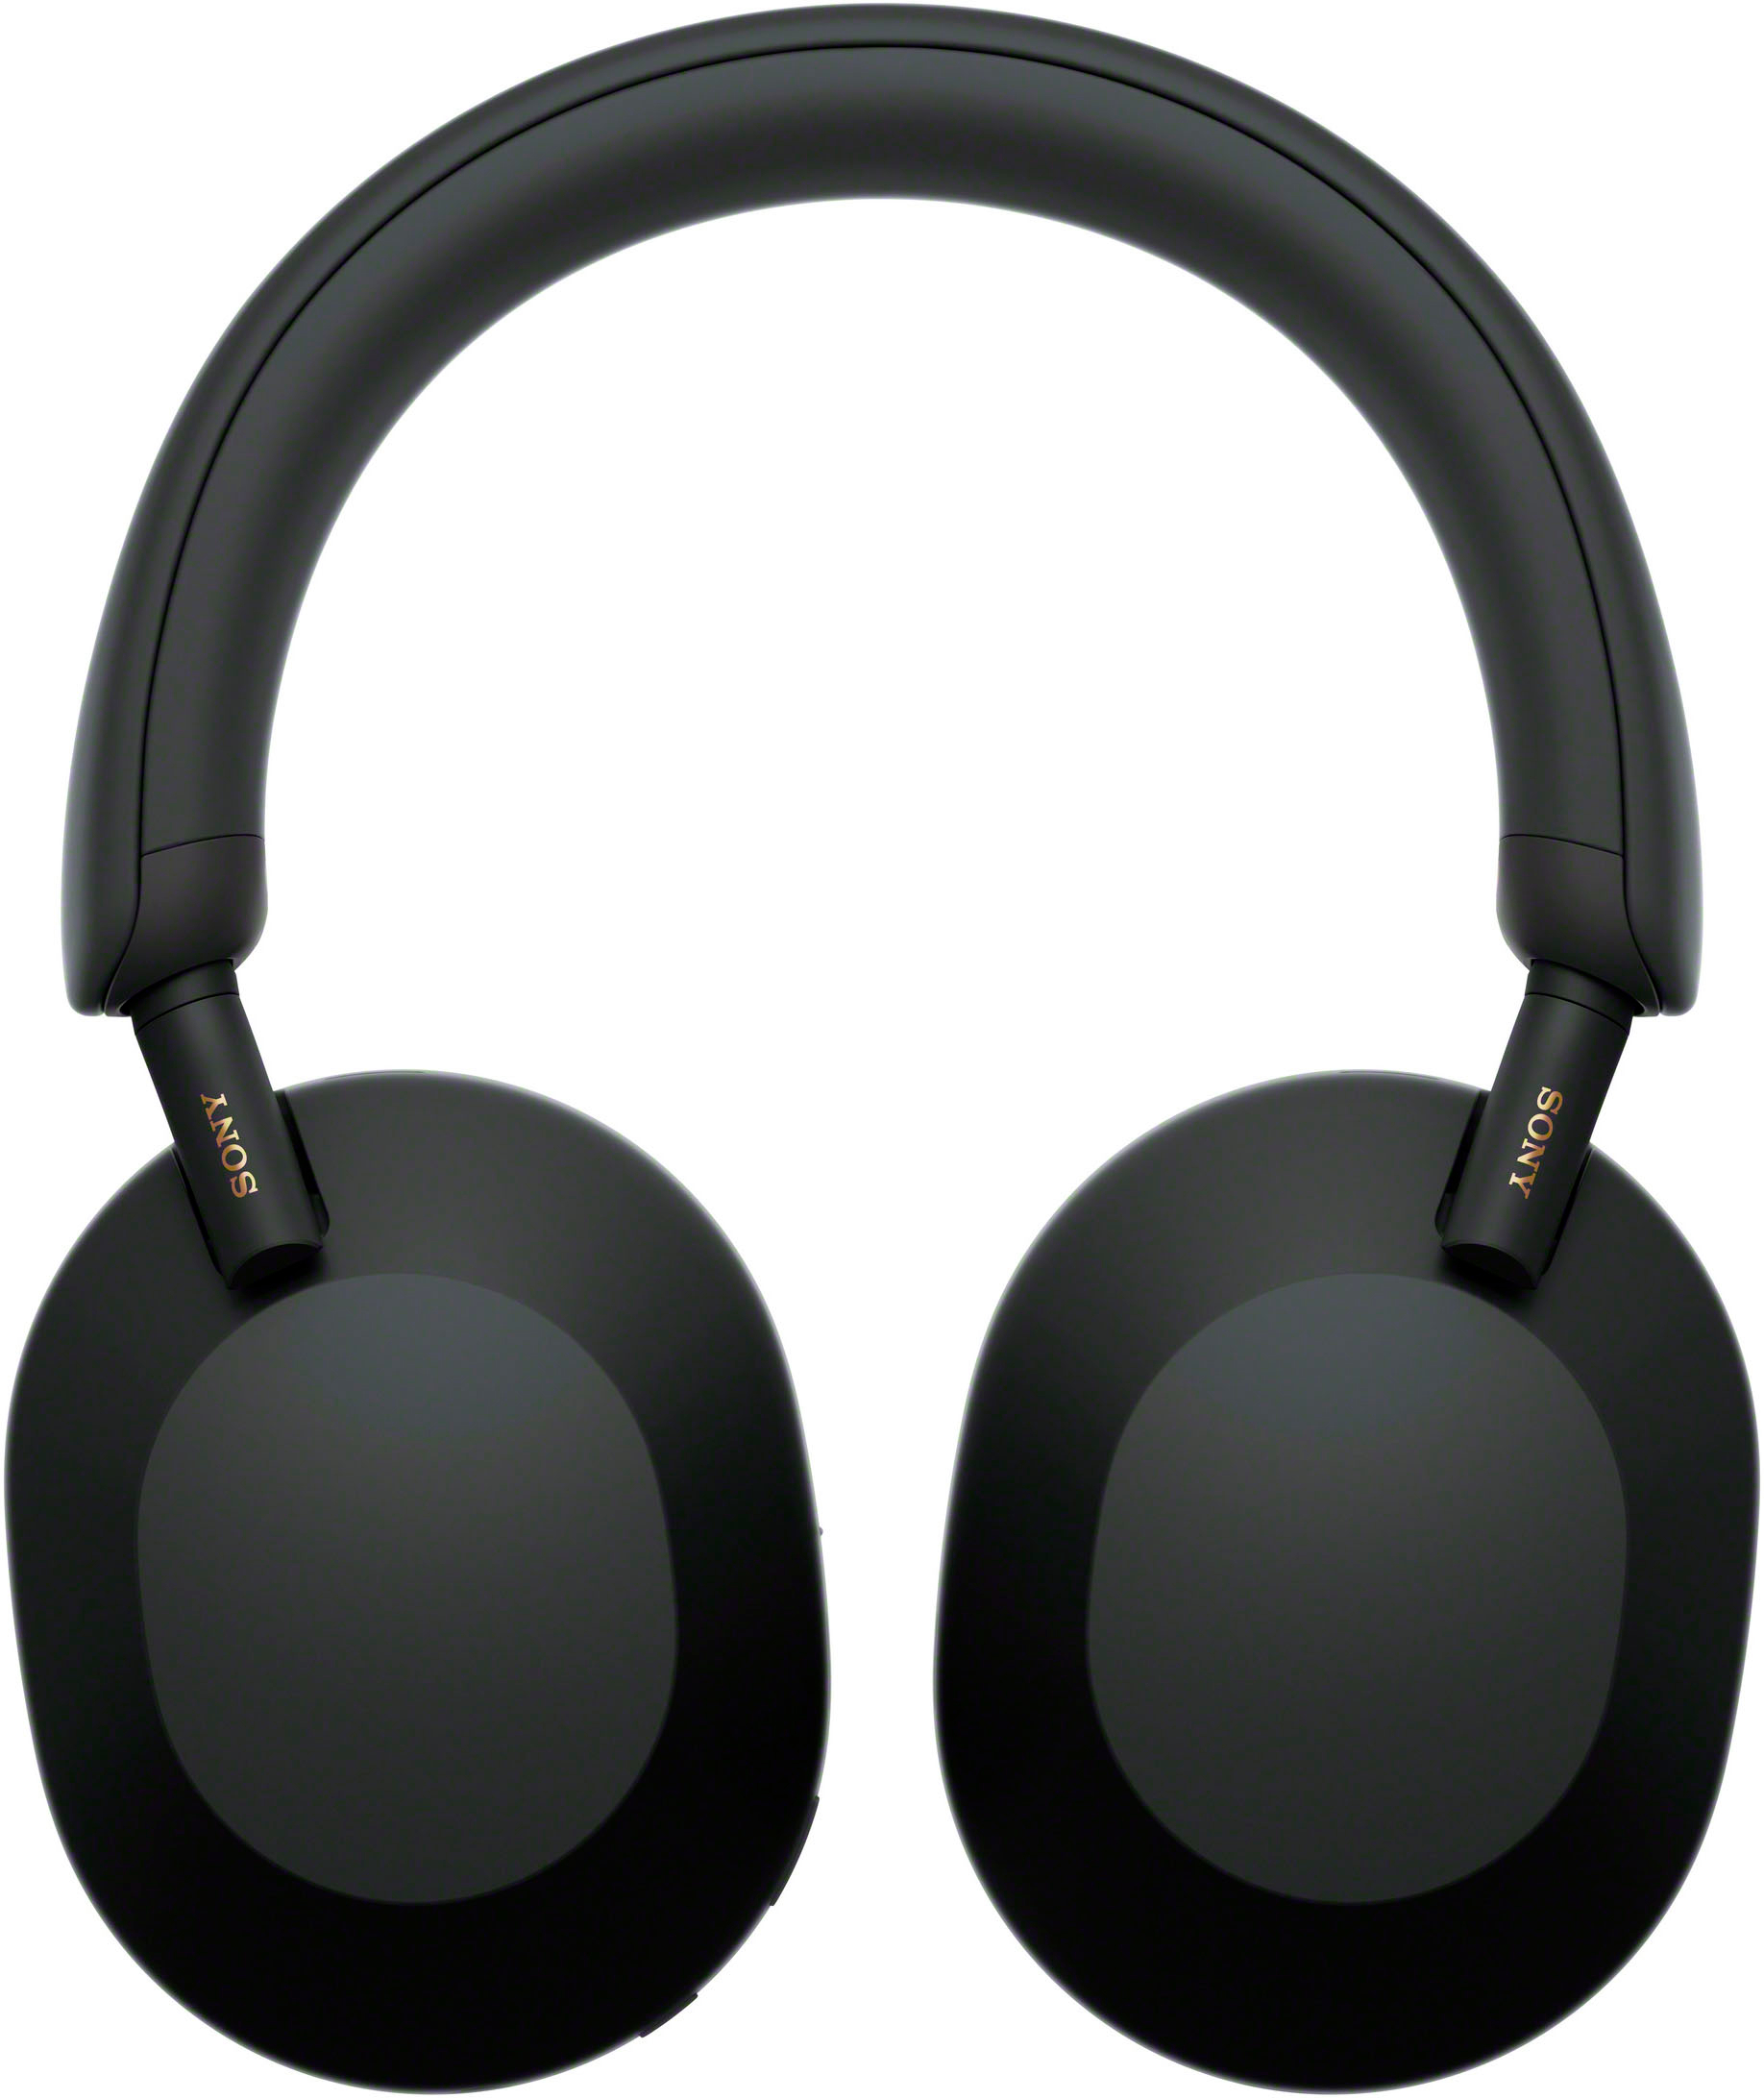 Sony WH1000XM5 Wireless Noise-Canceling Over-the-Ear Headphones